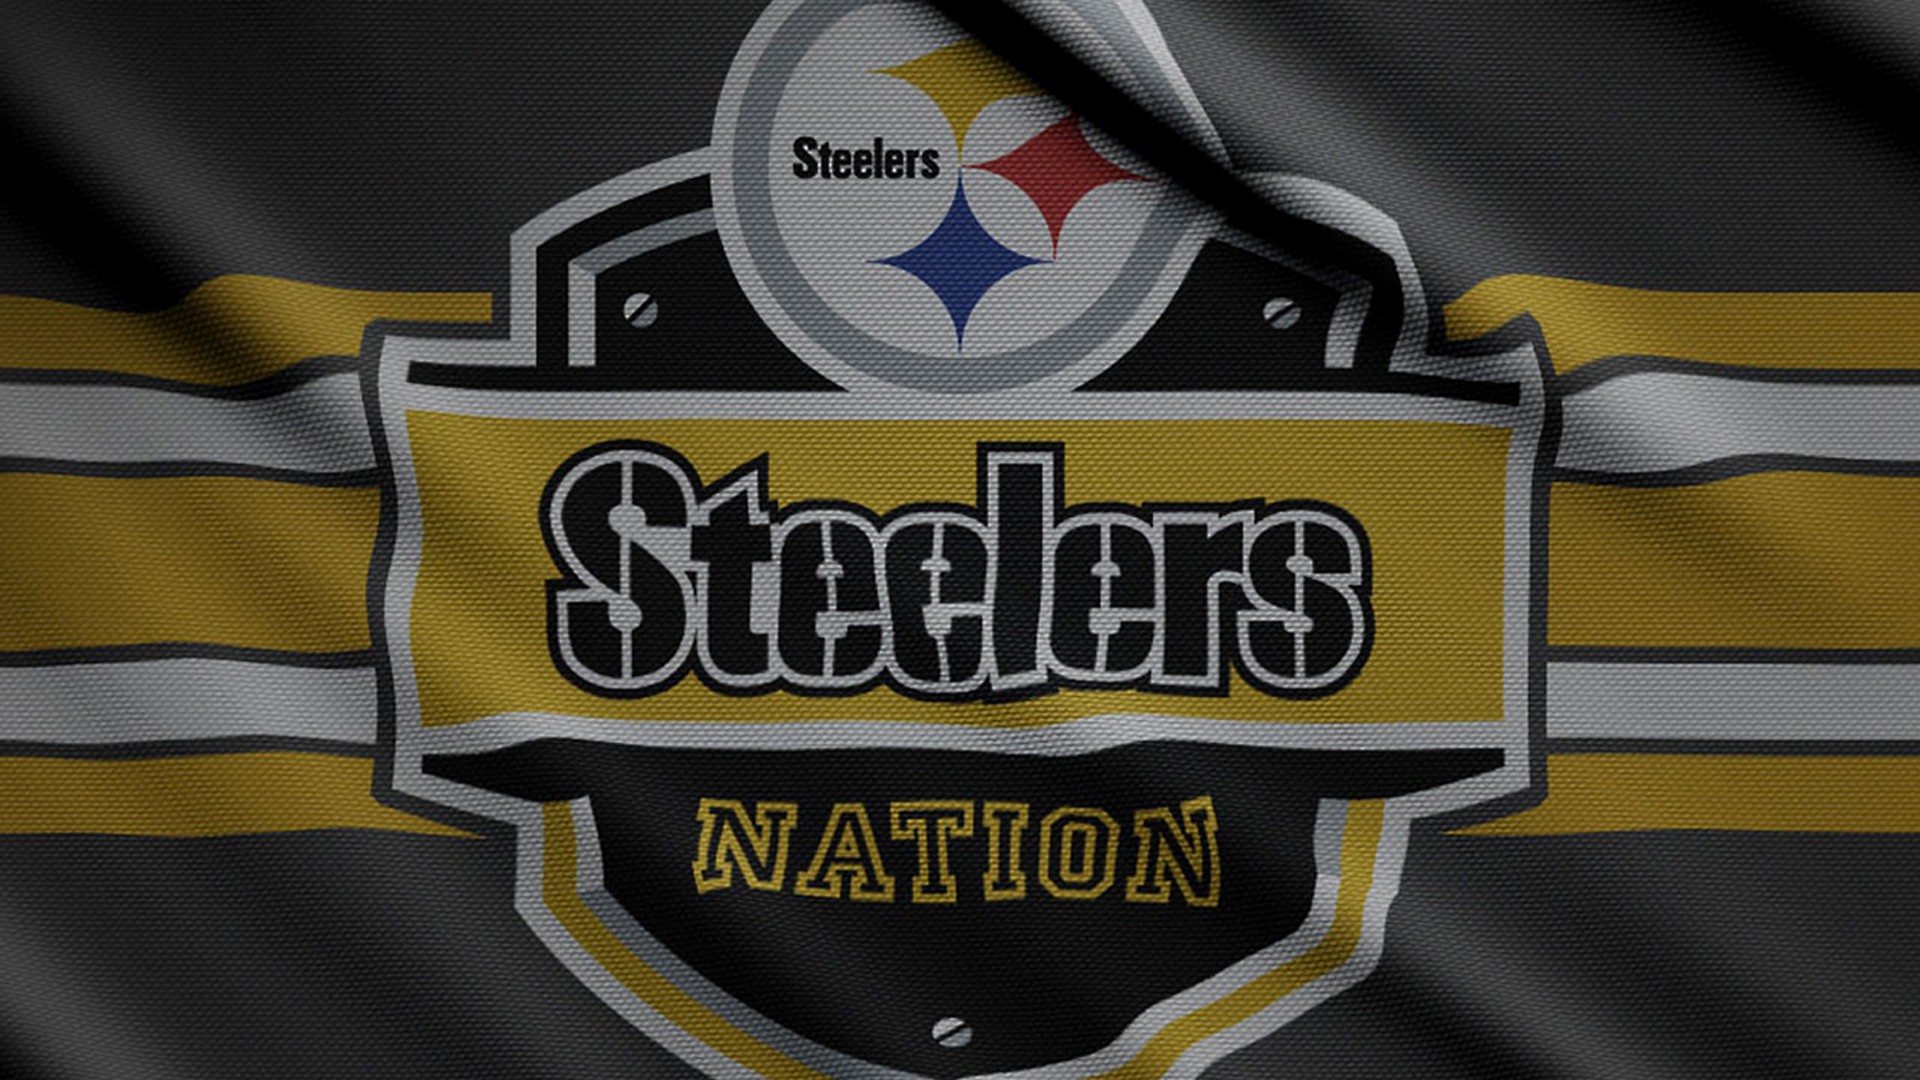 HD Steelers Logo Backgrounds With Resolution 1920X1080 pixel. You can make this wallpaper for your Mac or Windows Desktop Background, iPhone, Android or Tablet and another Smartphone device for free